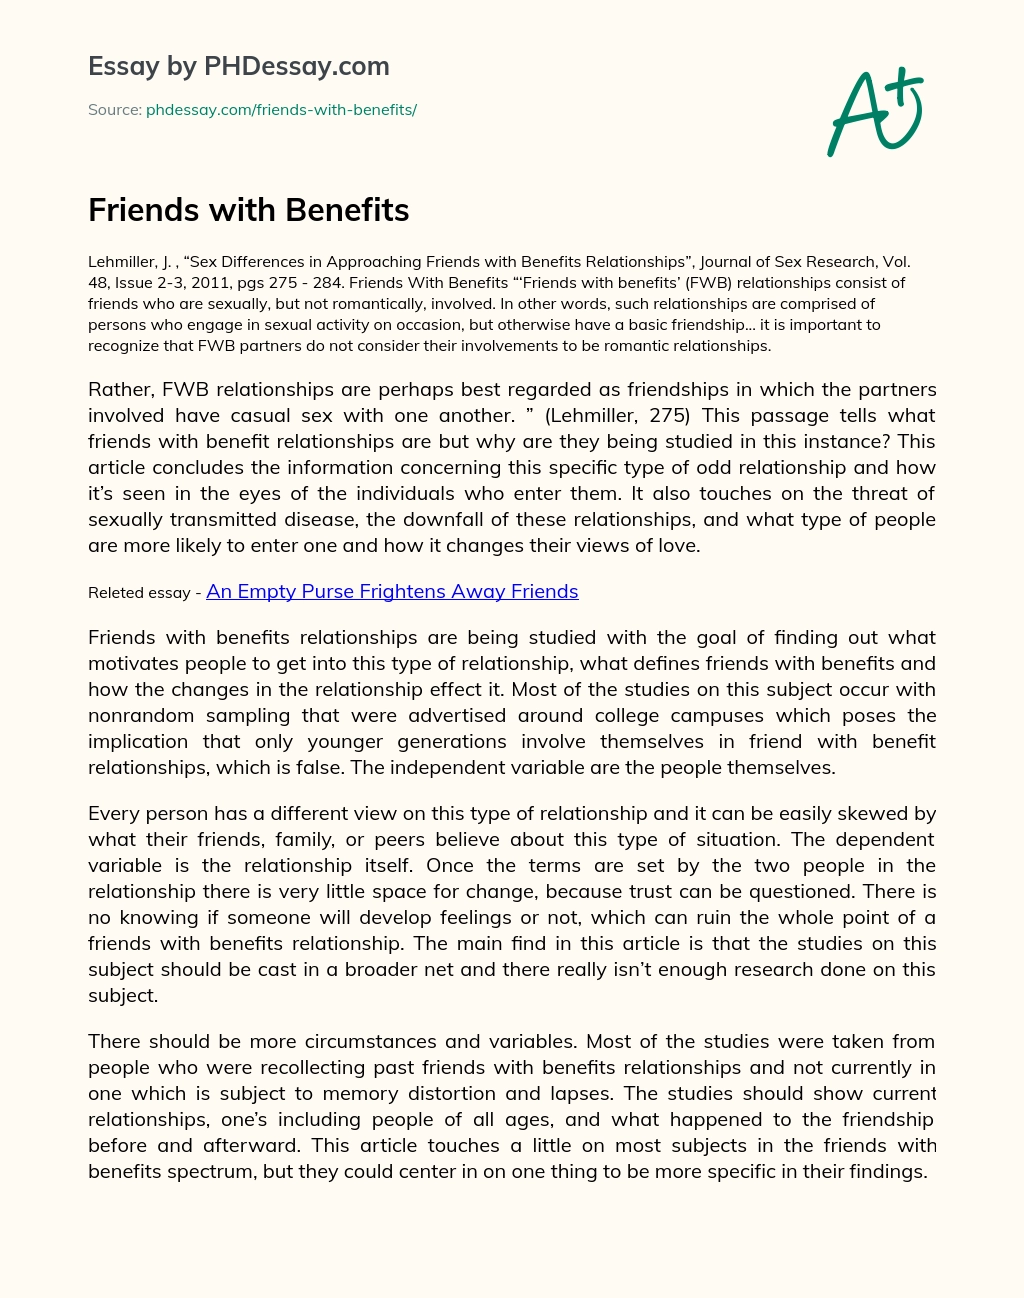 Friends with Benefits essay